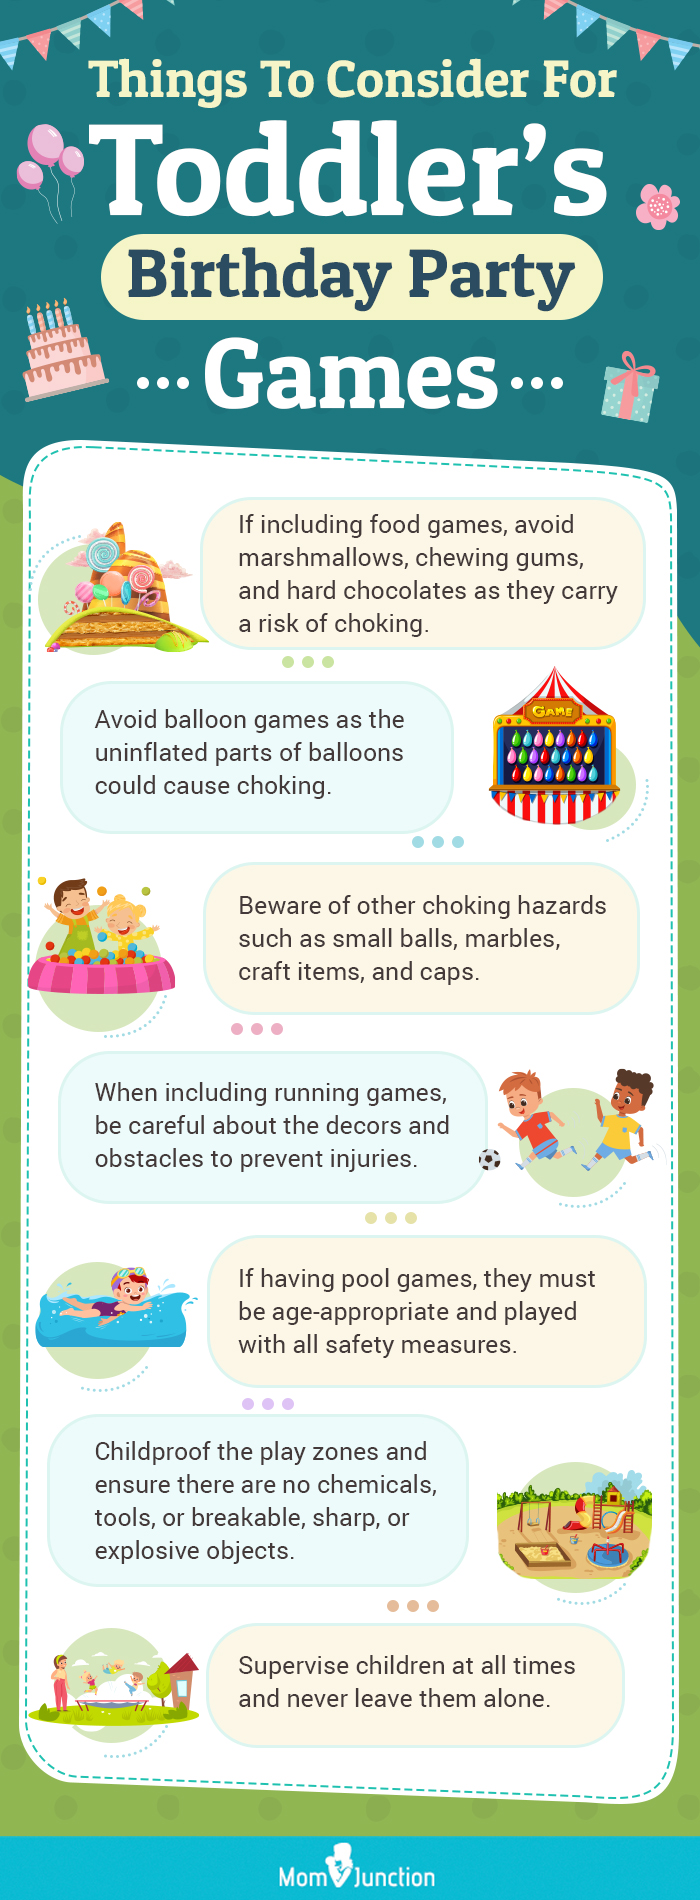 things to consider for toddler birthday party games (infographic)